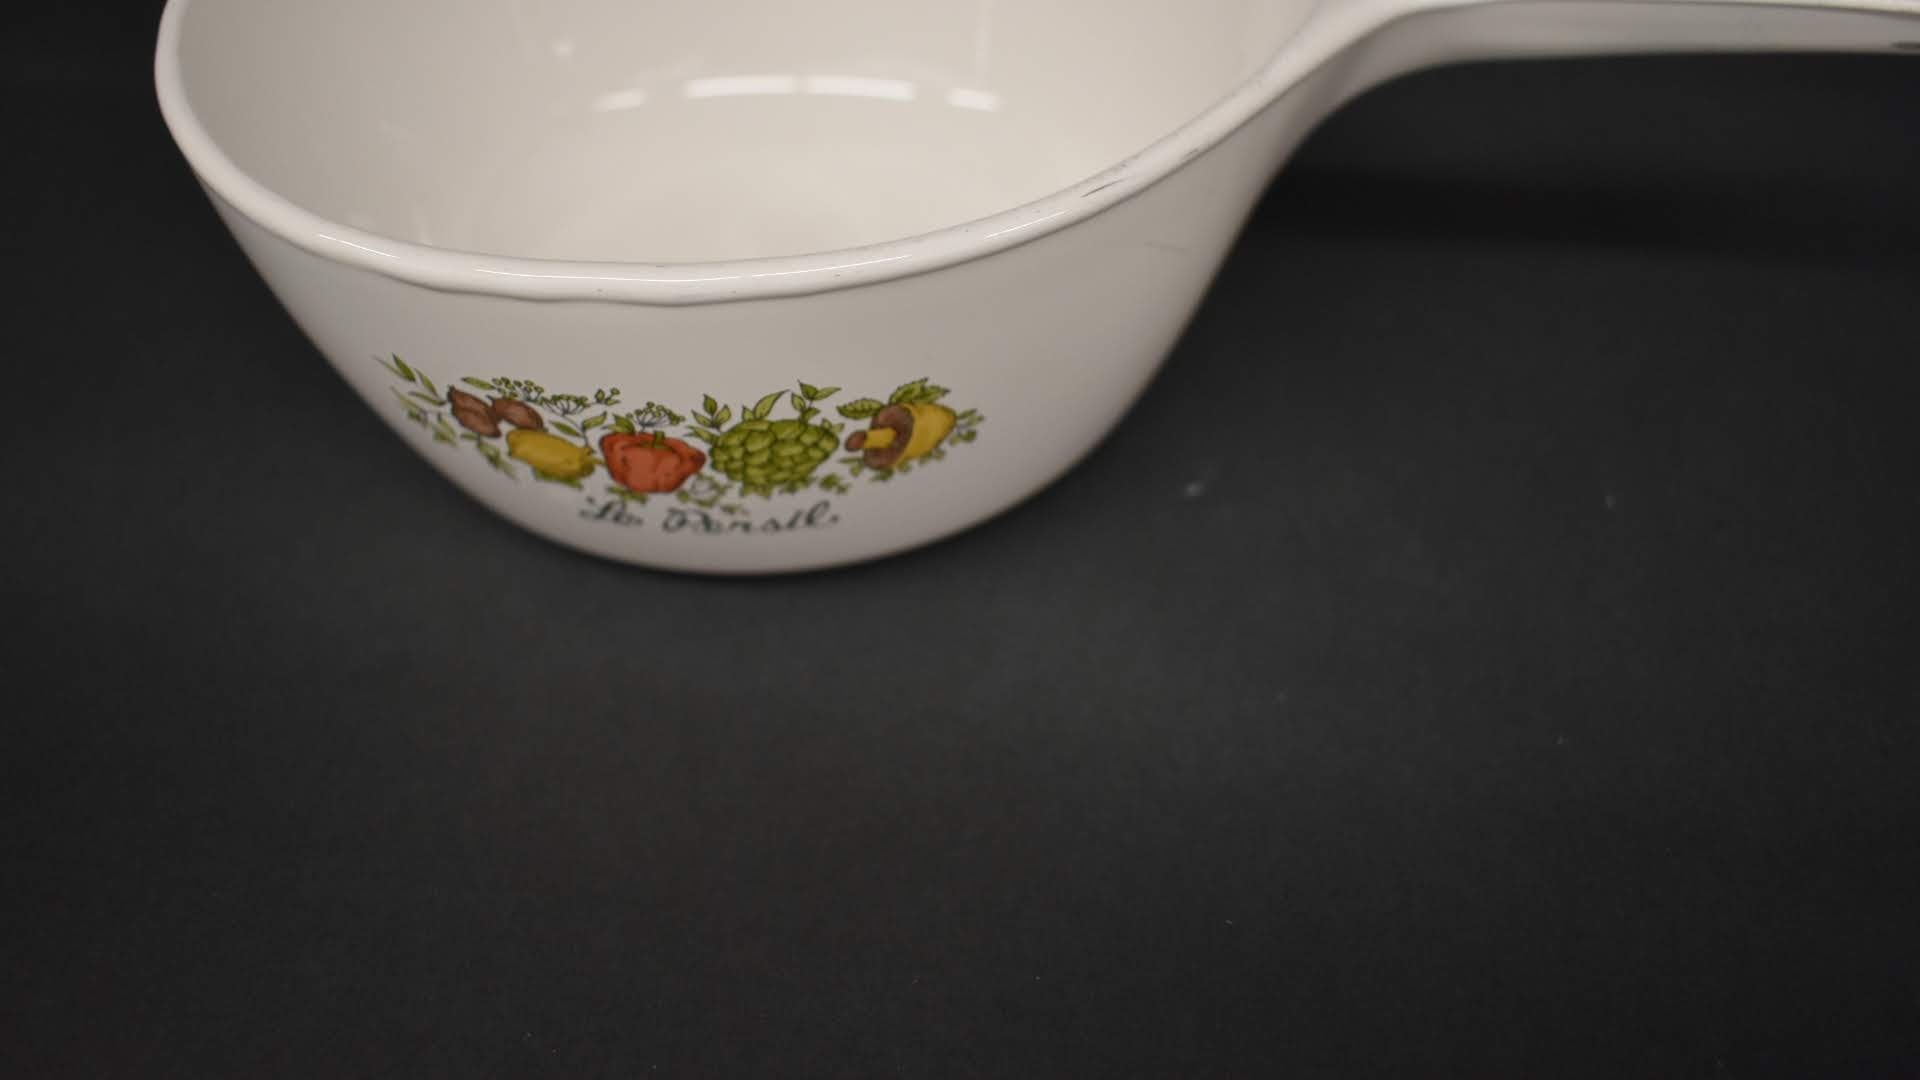 Spice Of Life - Corning Ware Casserole - Round Shape with handle